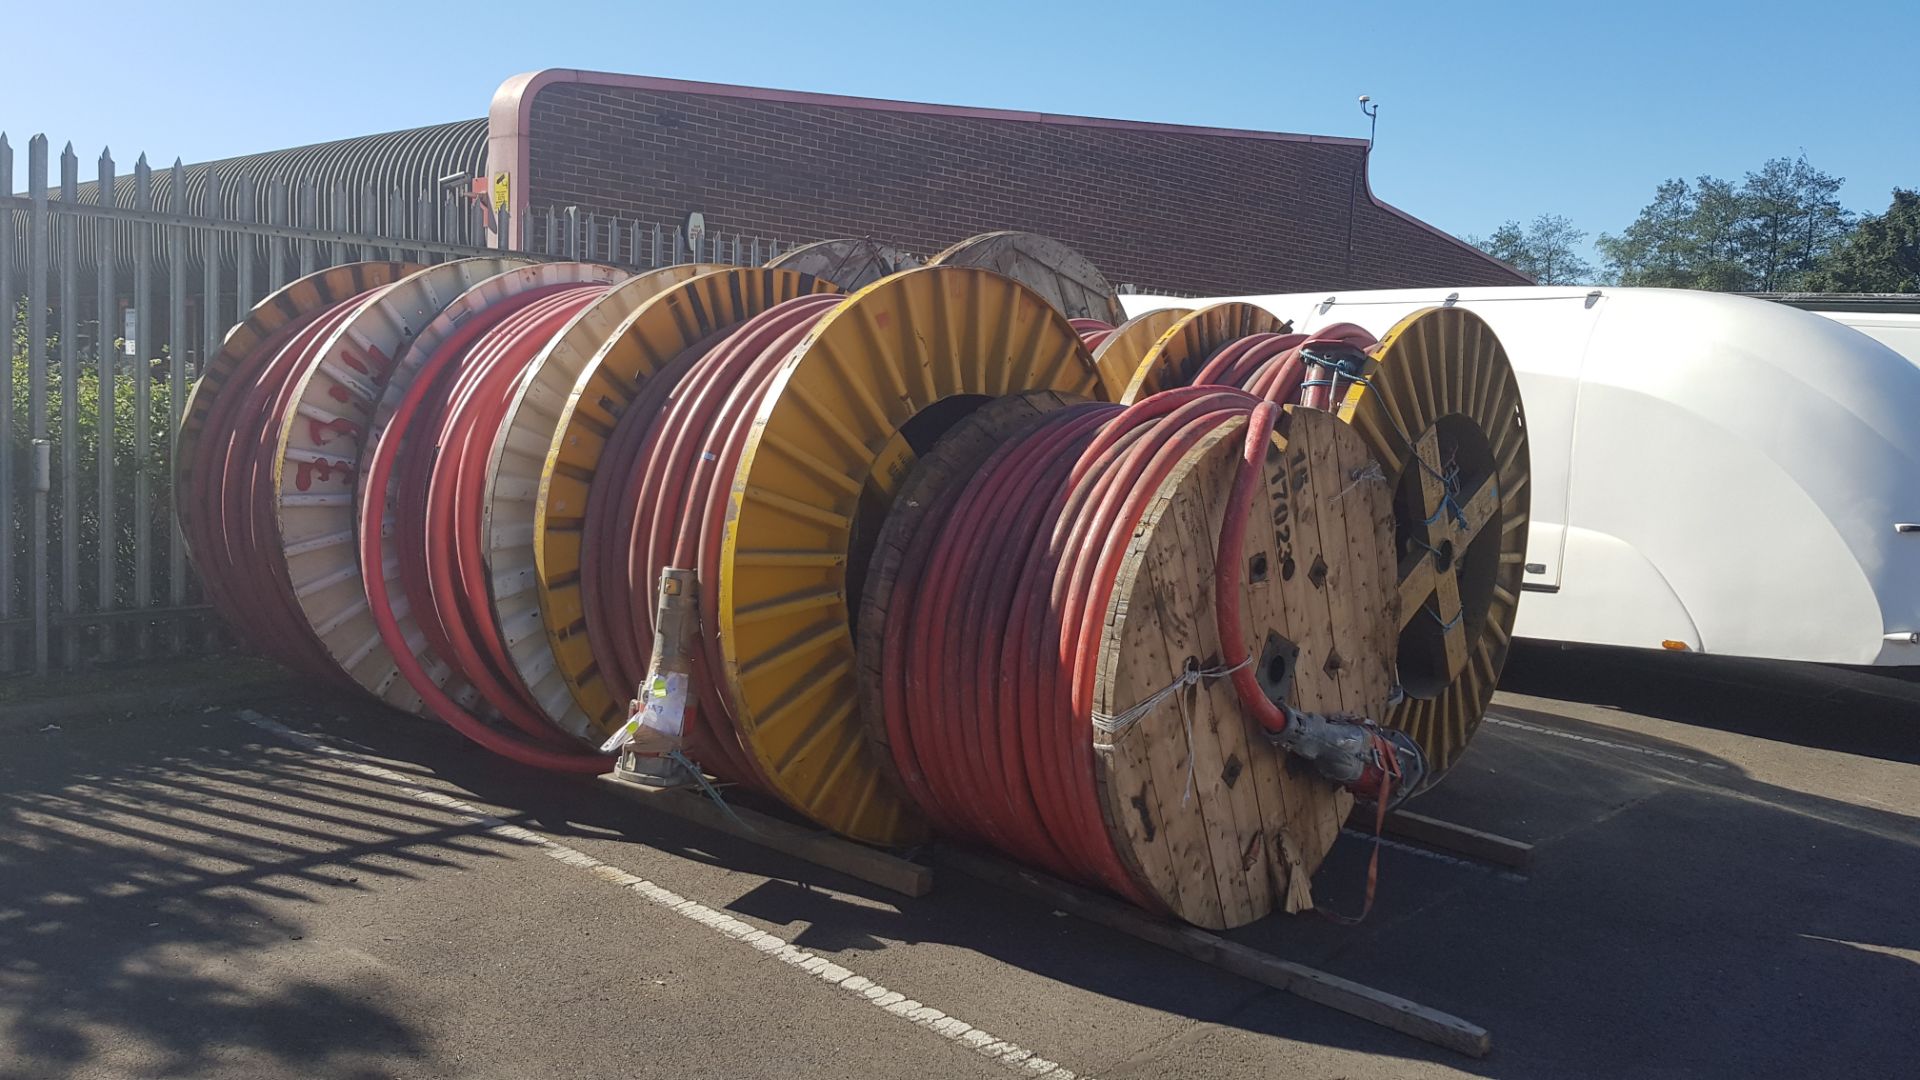 8 x Reels of Nexans High Voltage Cable Copper Core